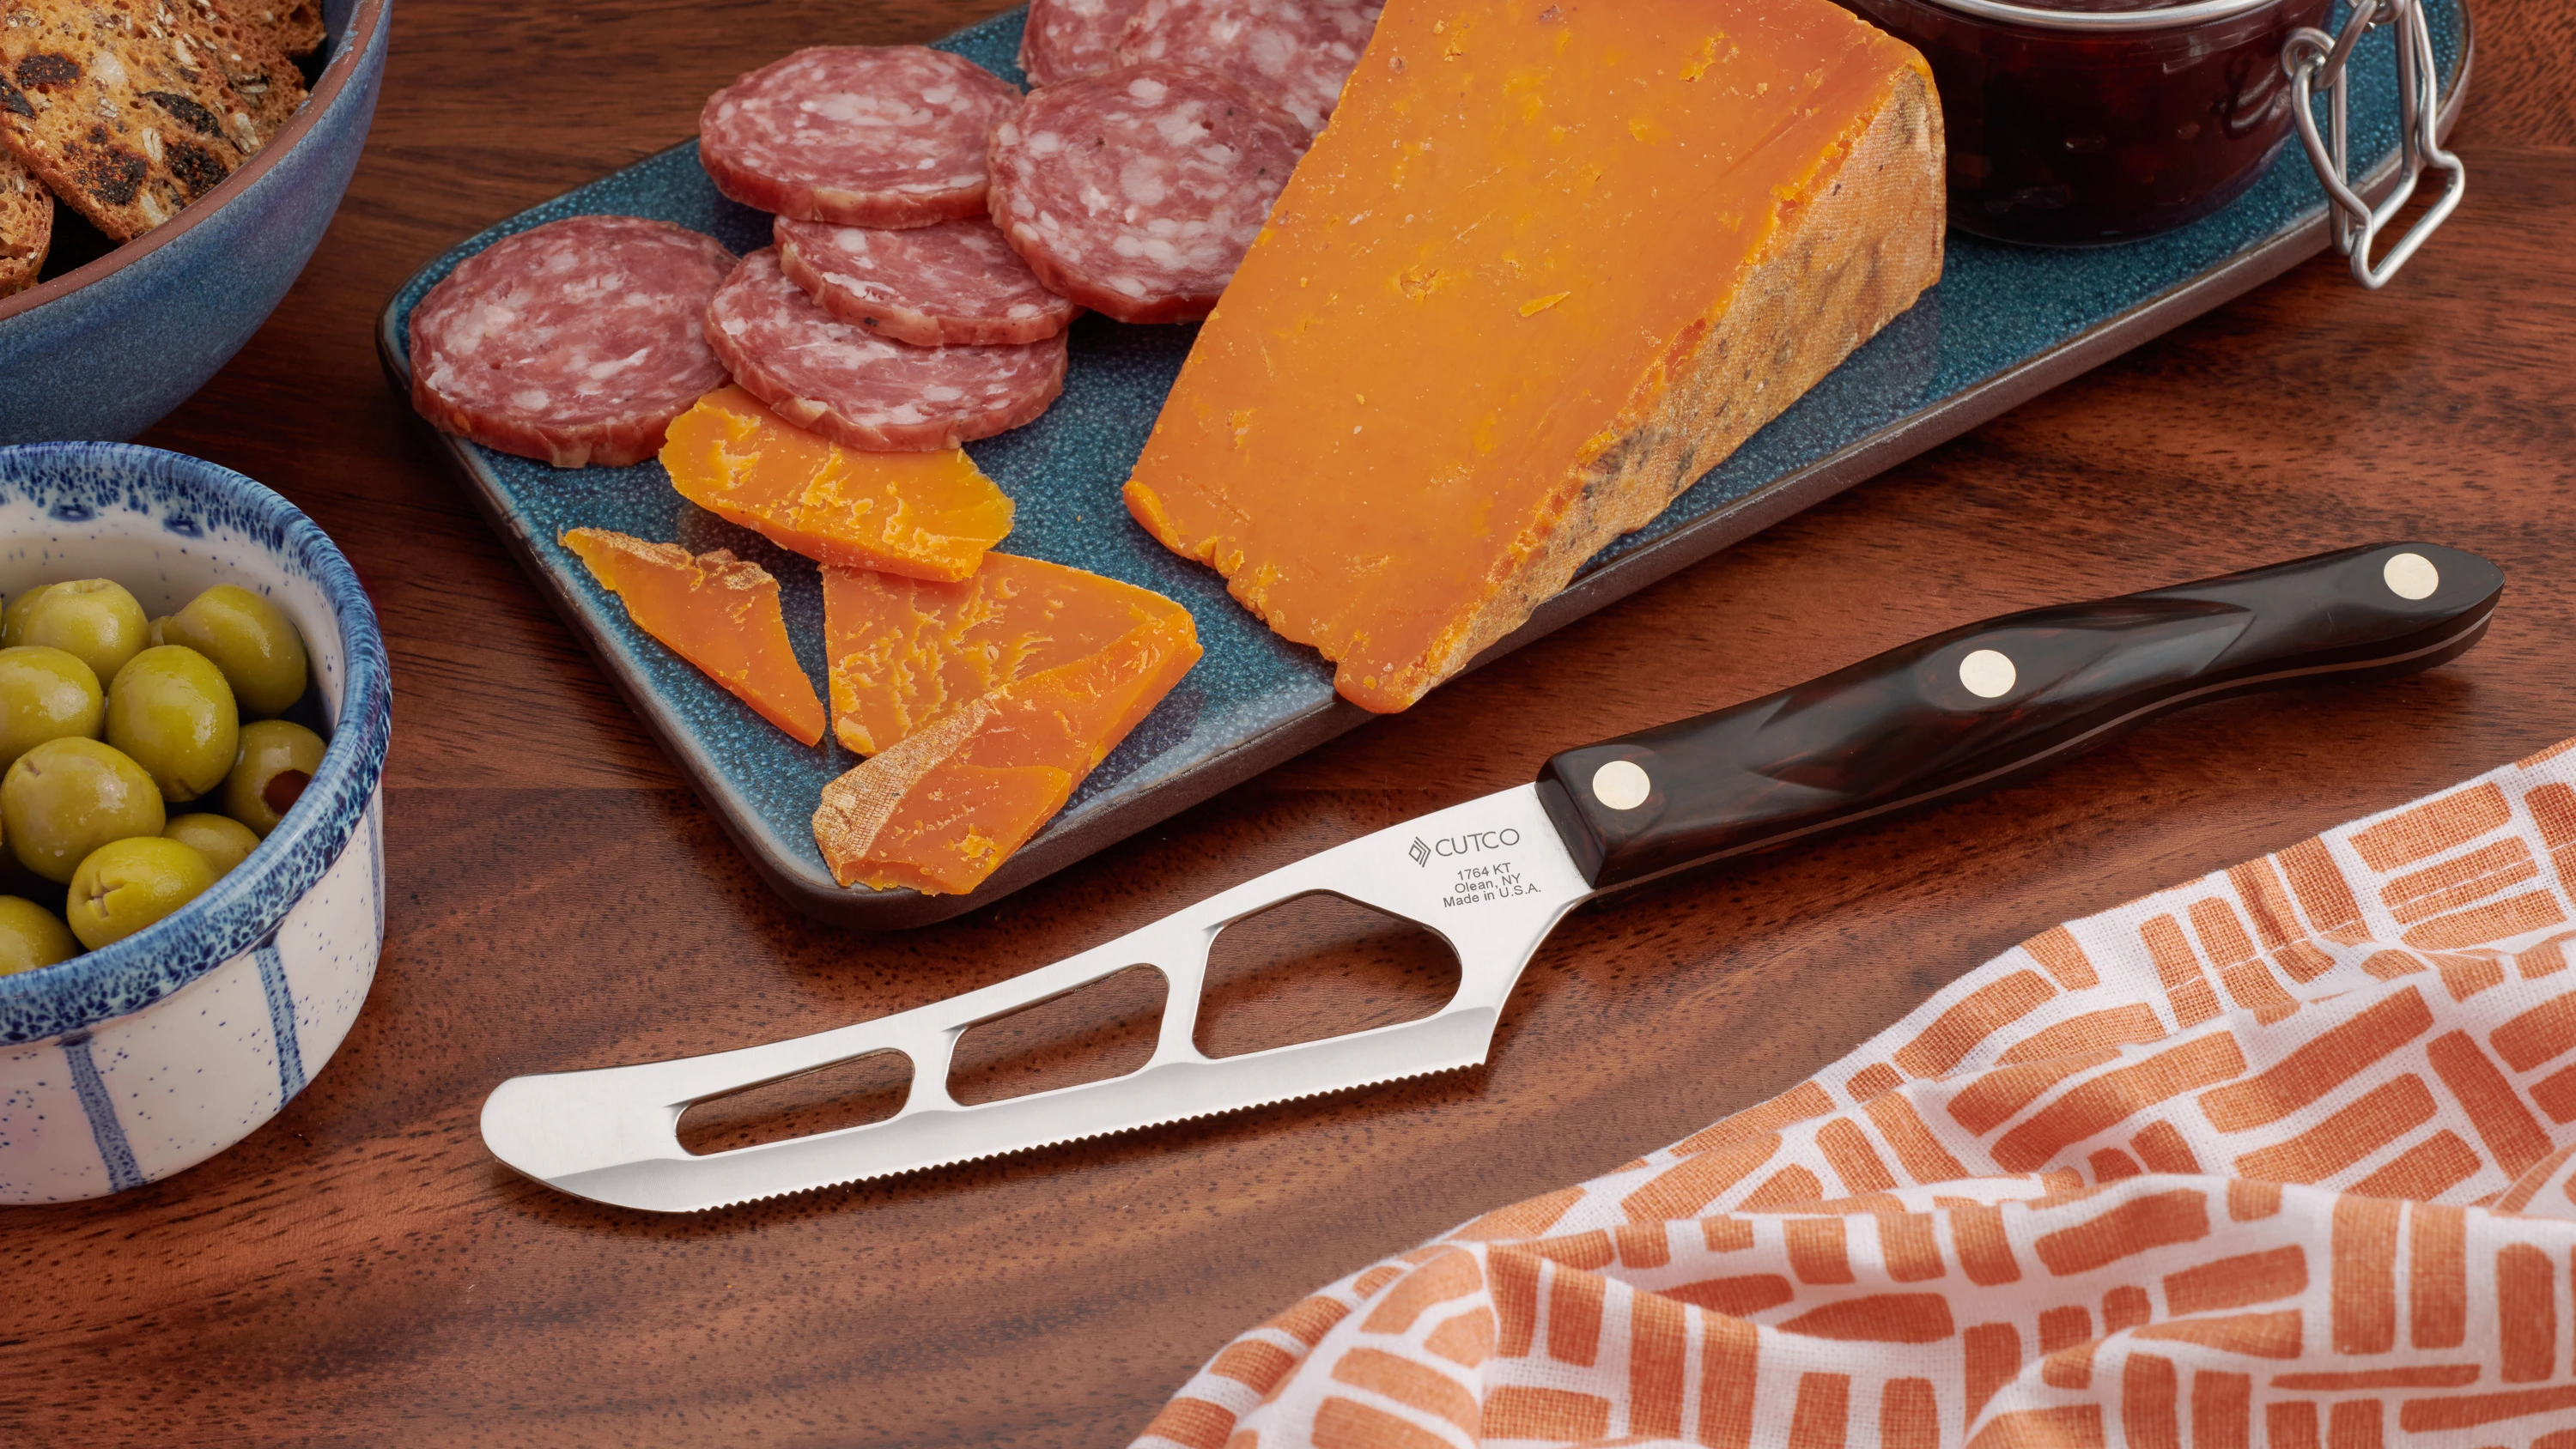 How To Cut Cheese With A Cheese Knife Video